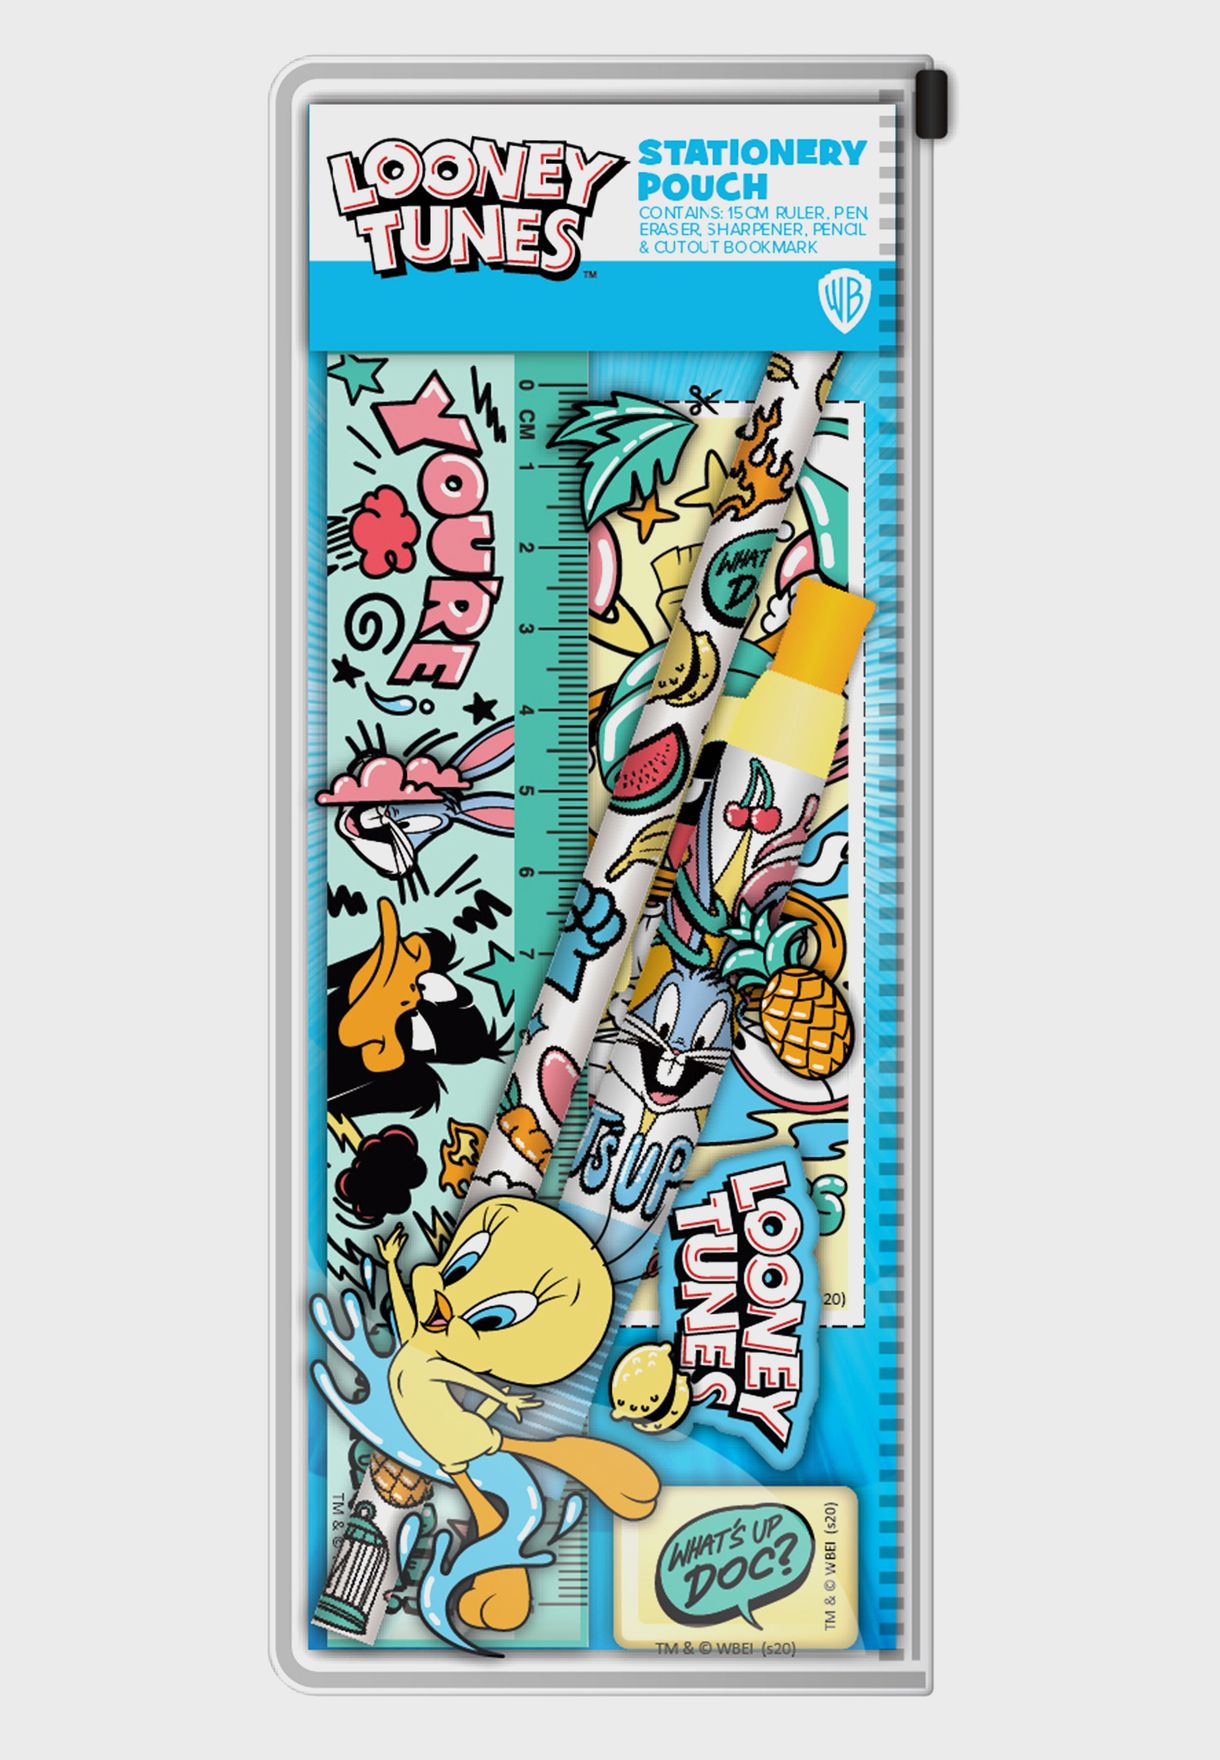 Looney Tunes Stationery Pouch